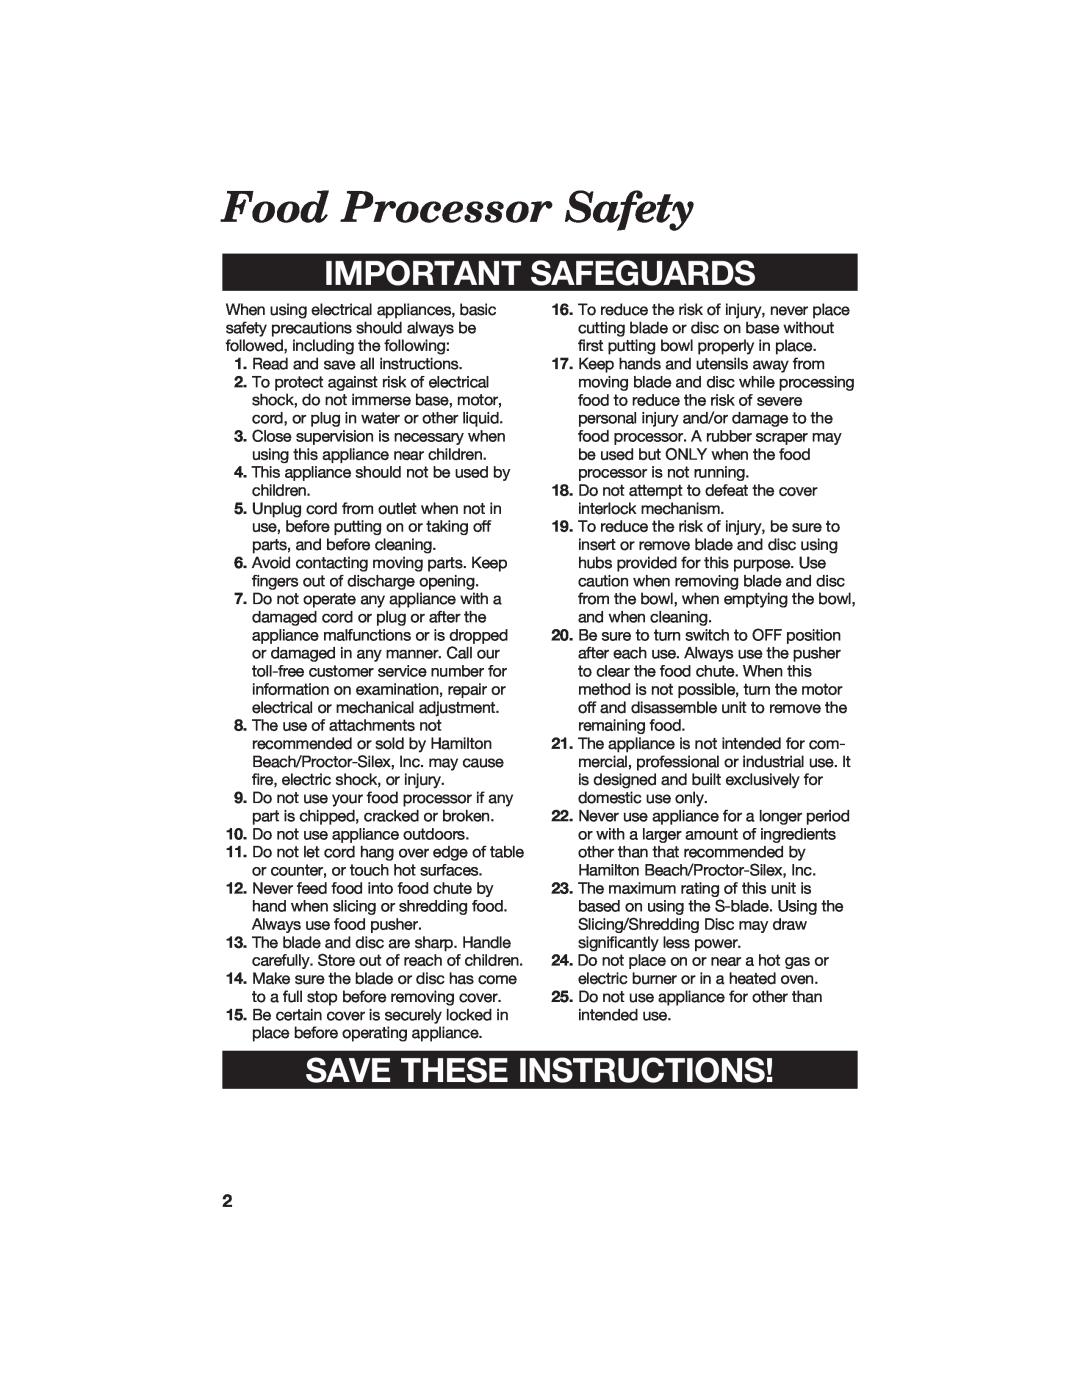 Hamilton Beach 840072000 manual Food Processor Safety, Important Safeguards, Save These Instructions 